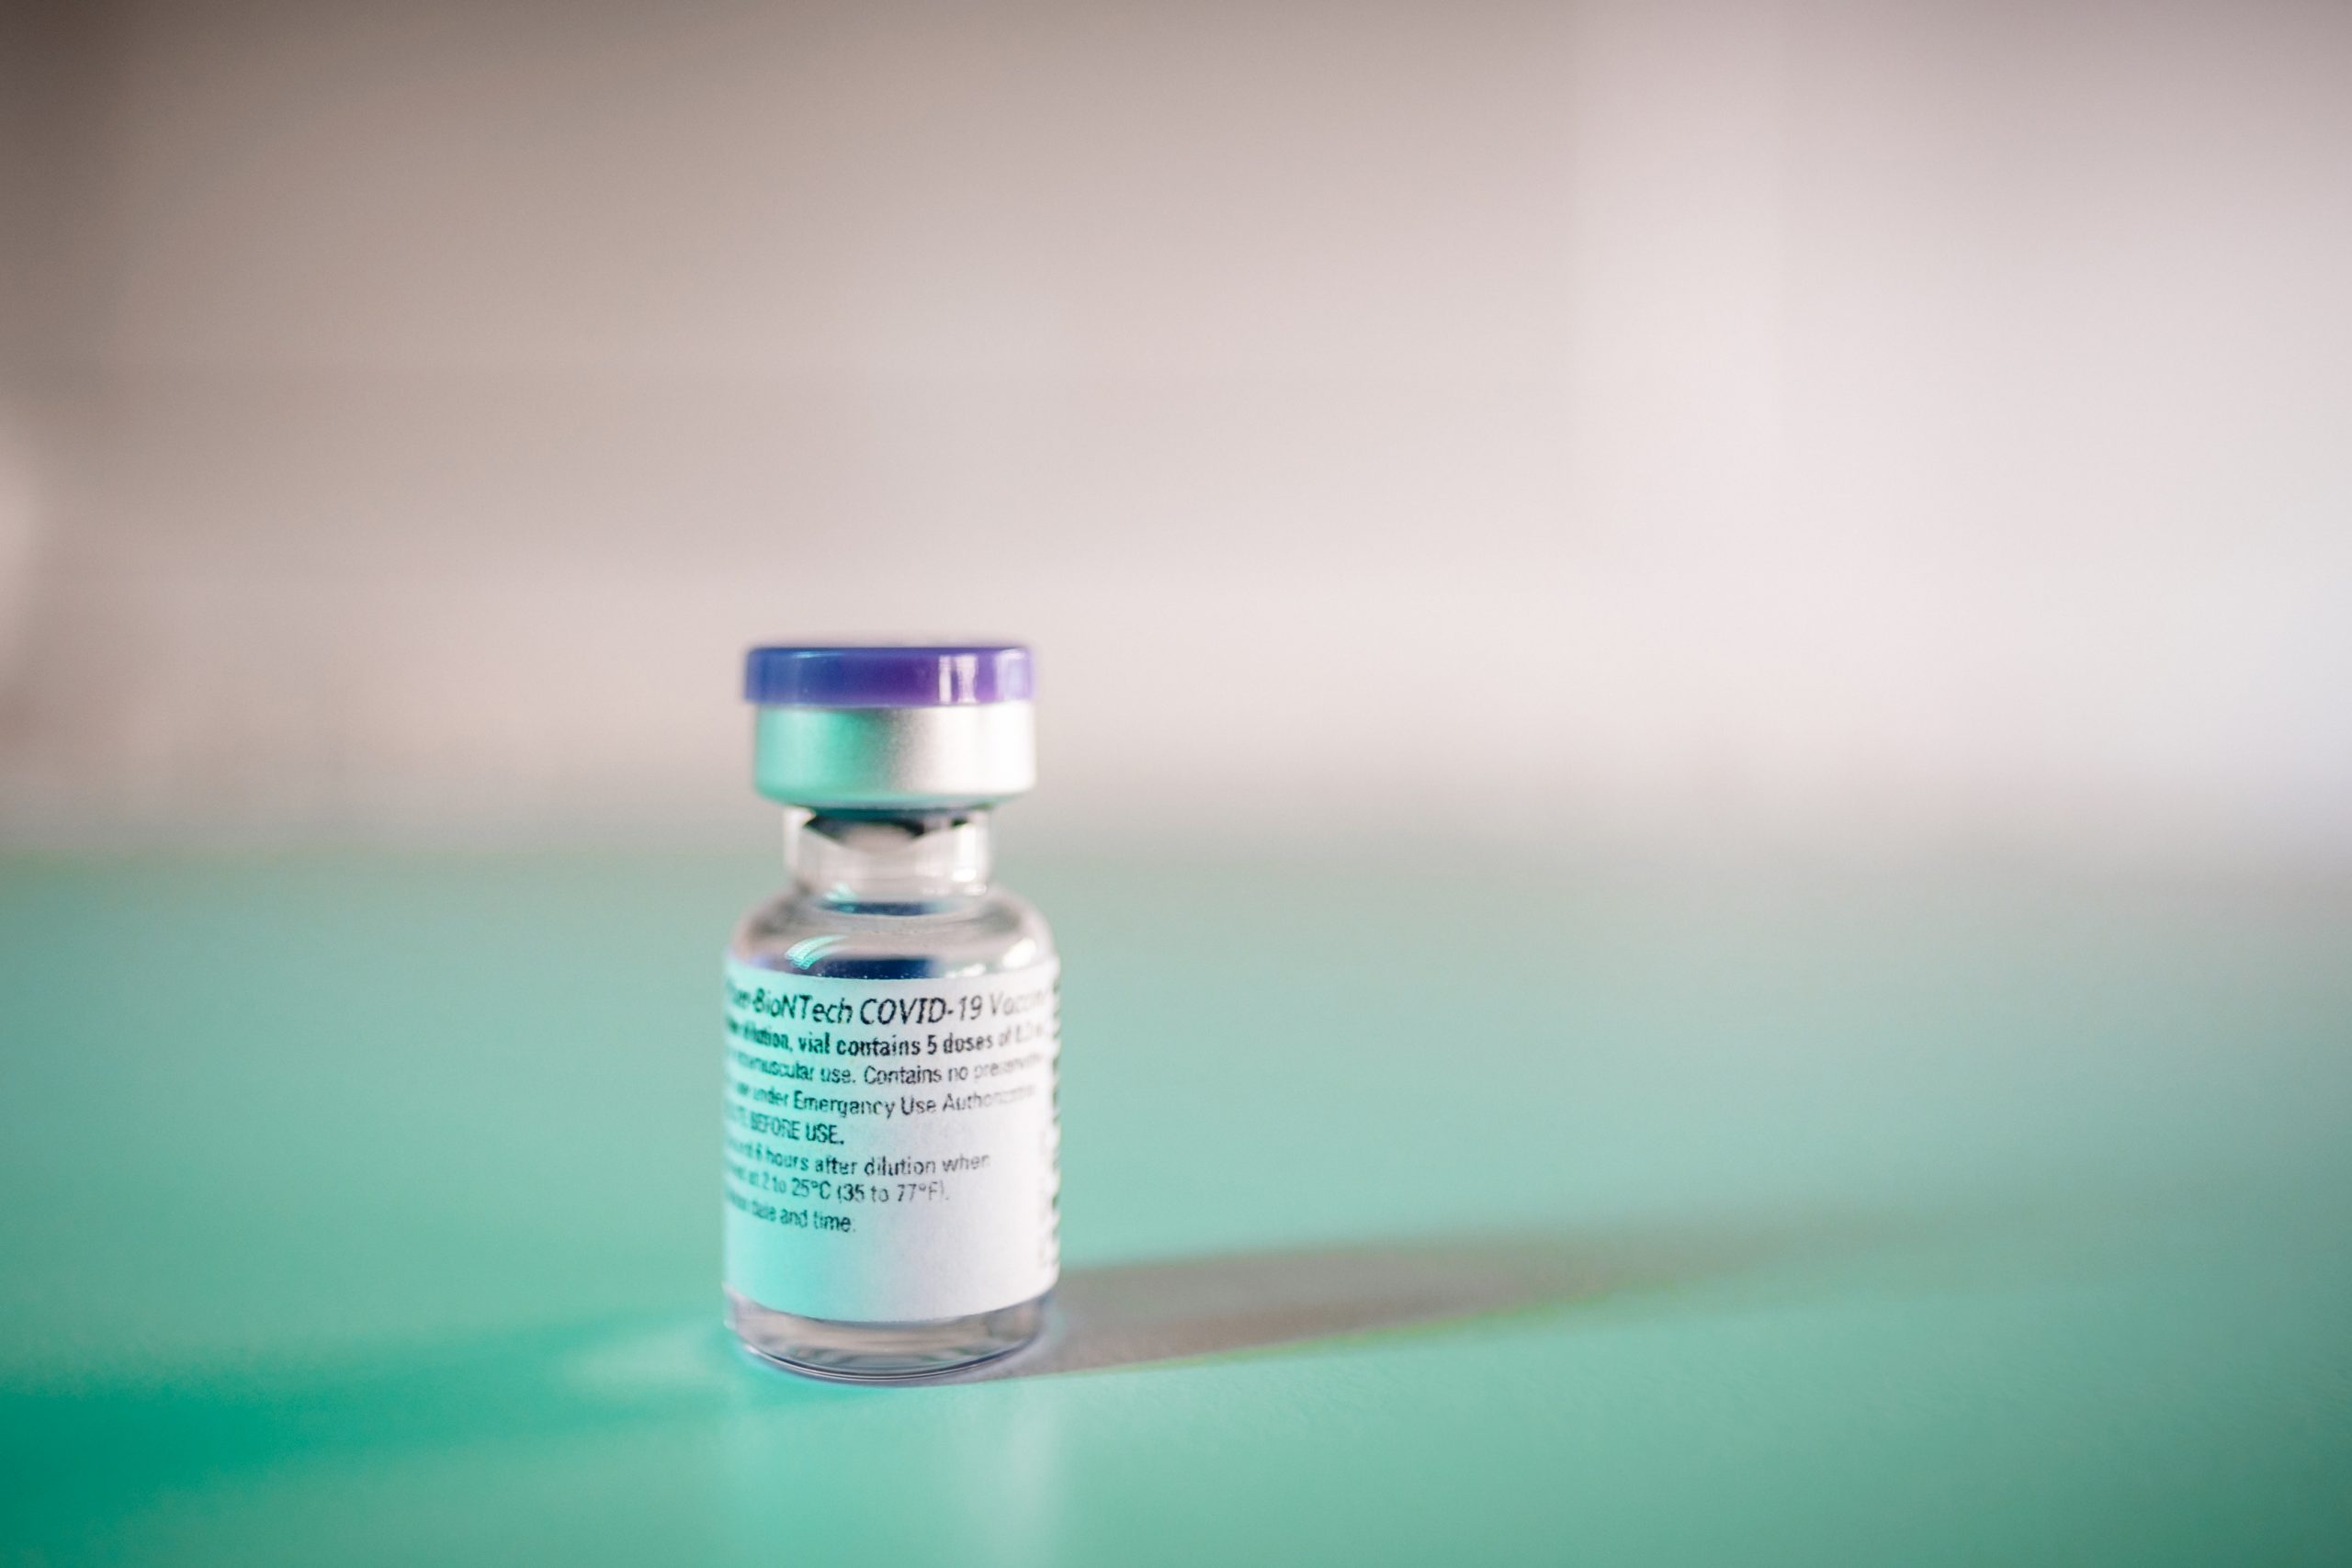 Pfizer COVID-19 vaccine boosters authorized for more eligible people